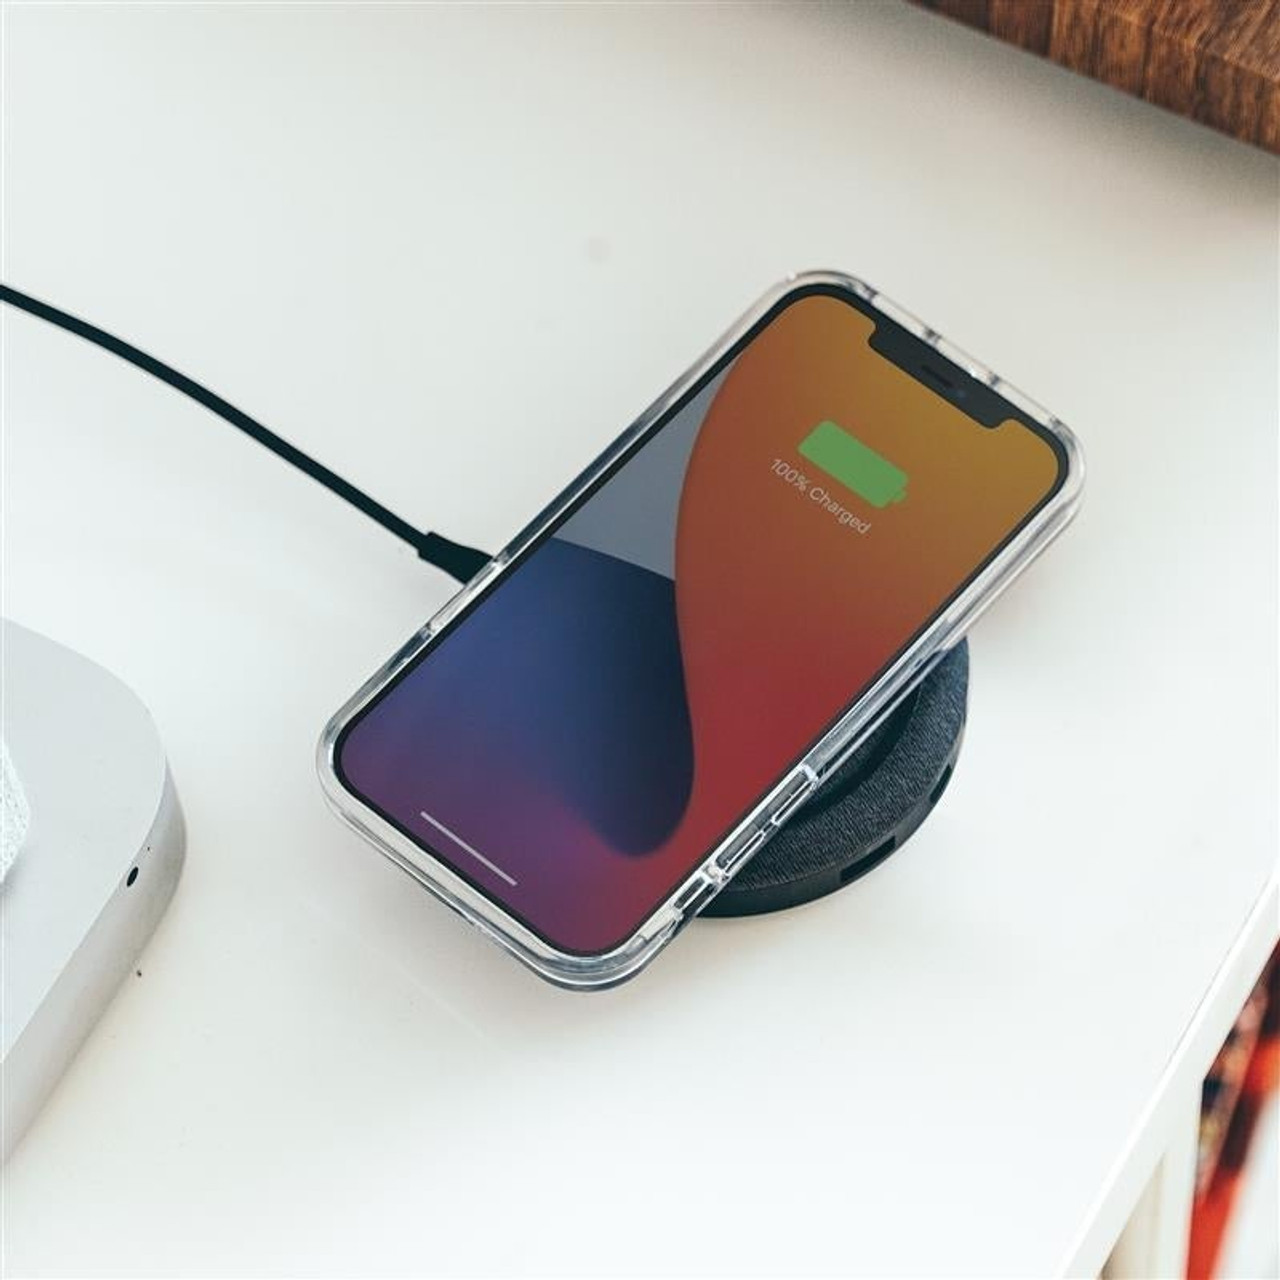 Shop Mophie Wireless Charging Hub with EU Adapter